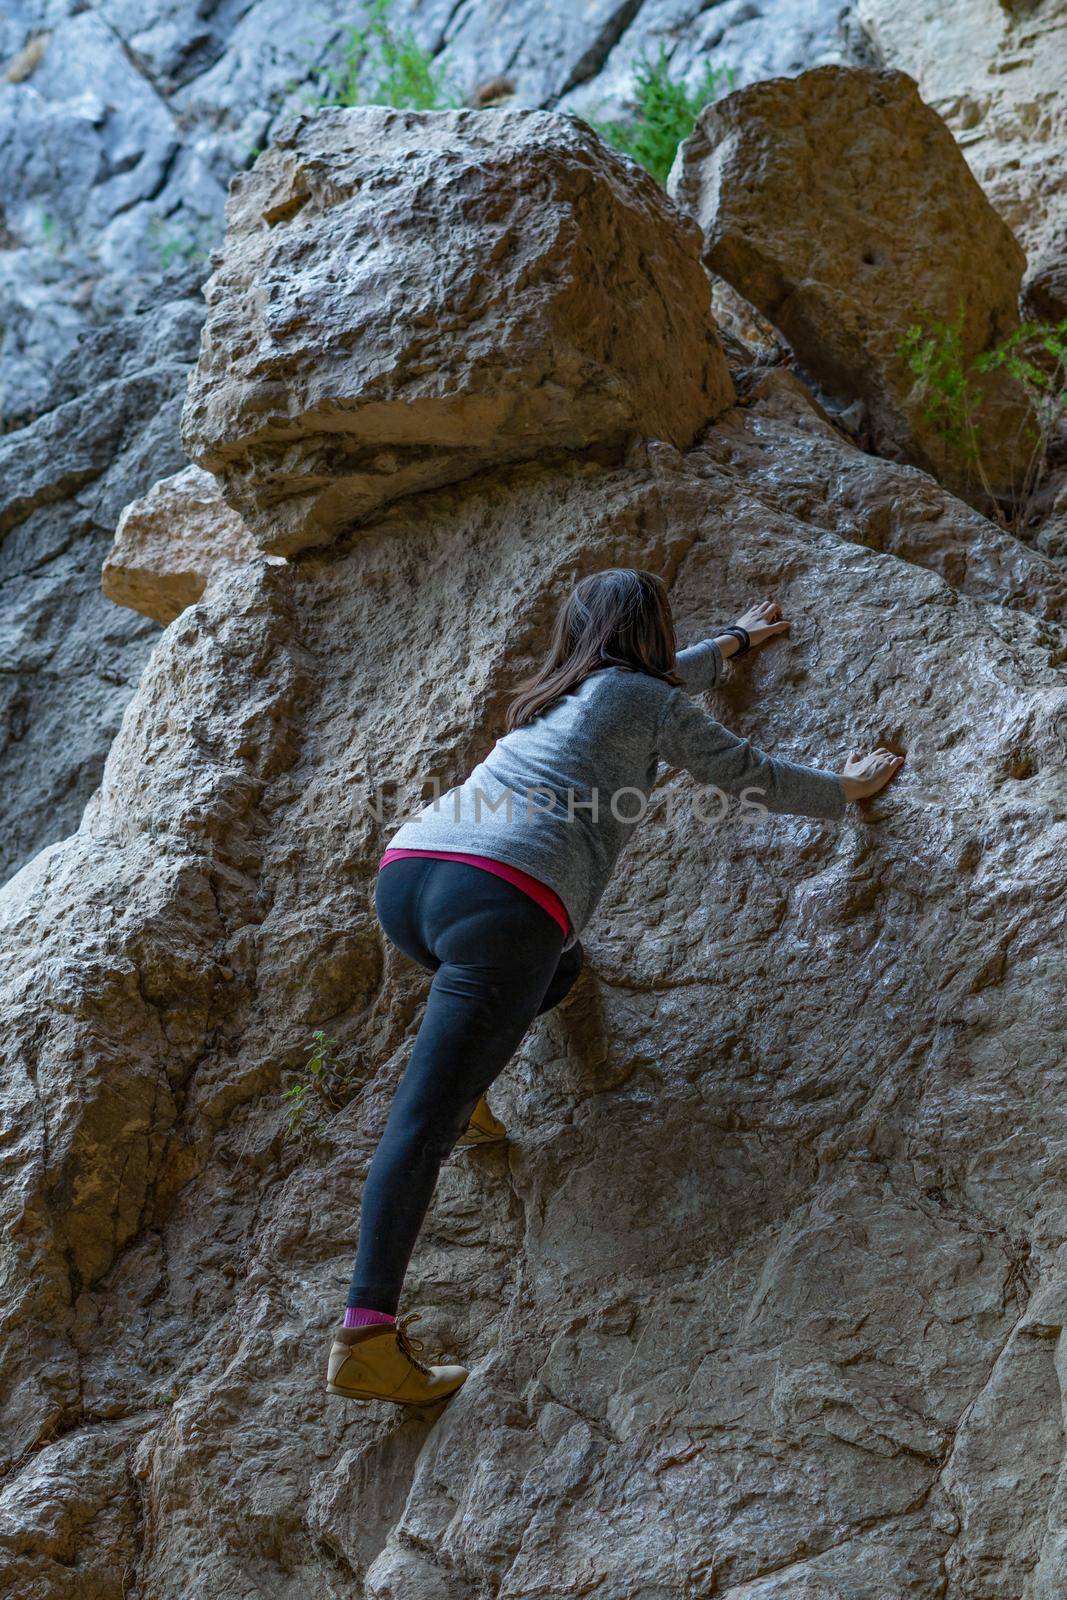 young girl learning rock climbing in high mountain with blue sweater, black tights and boots.